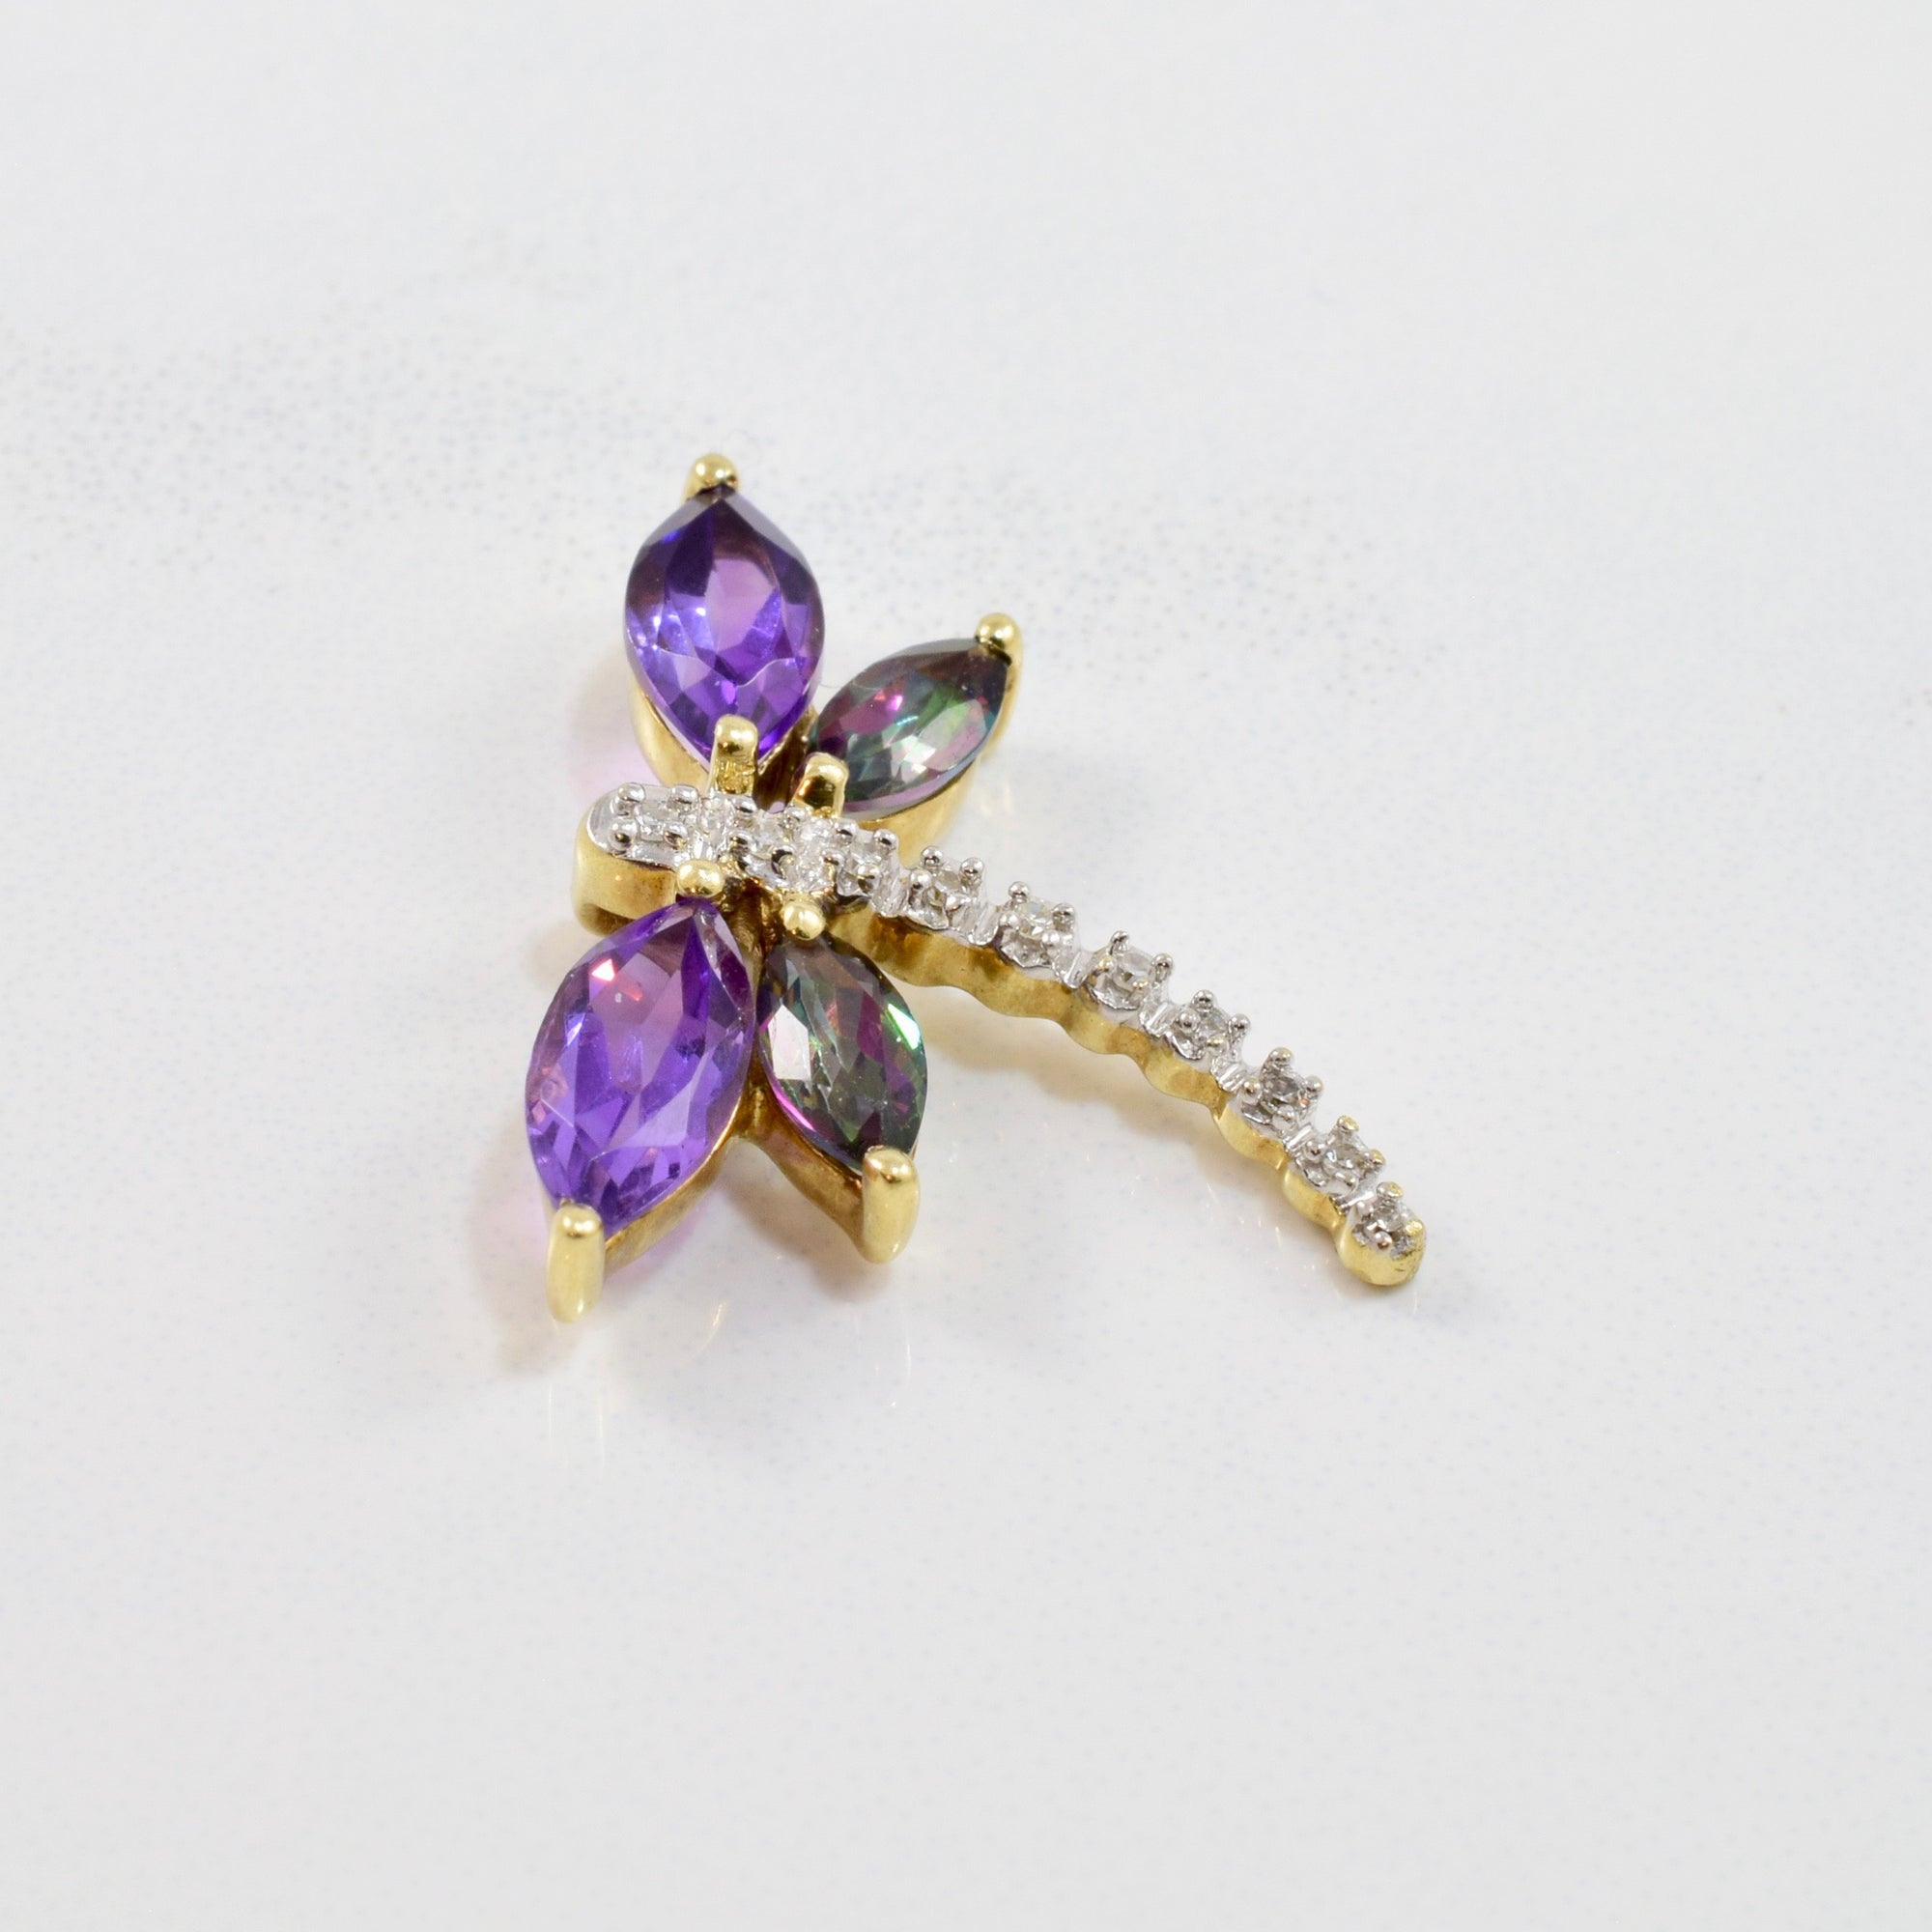 Dragonfly Amethyst and Mystic Topaz Pendant | 0.03 ctw |